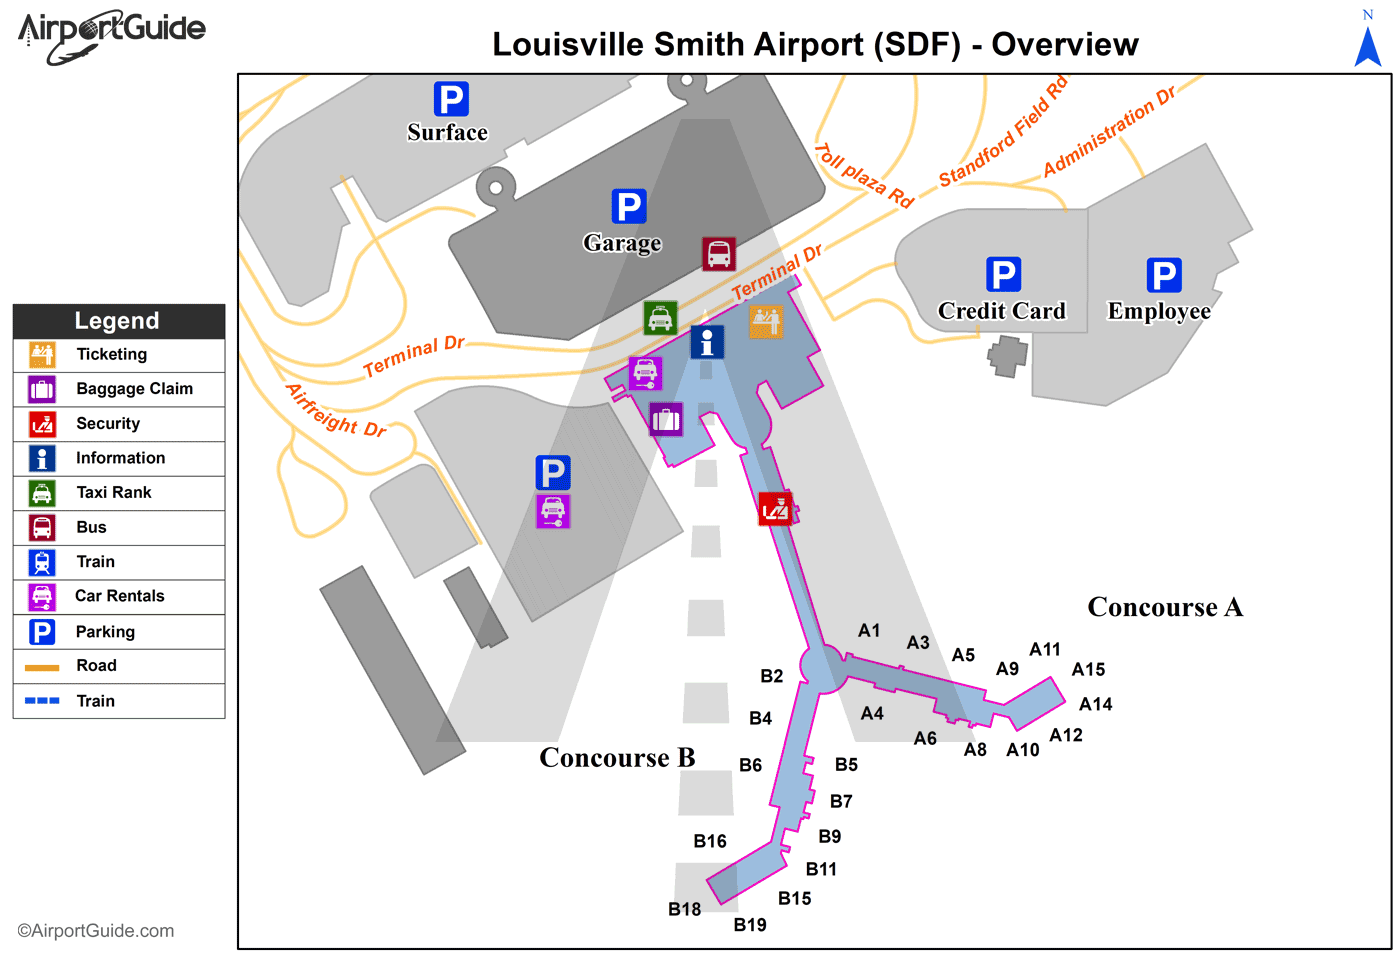 Louisville - Ohio County (SDF) Airport Terminal Map - Overview